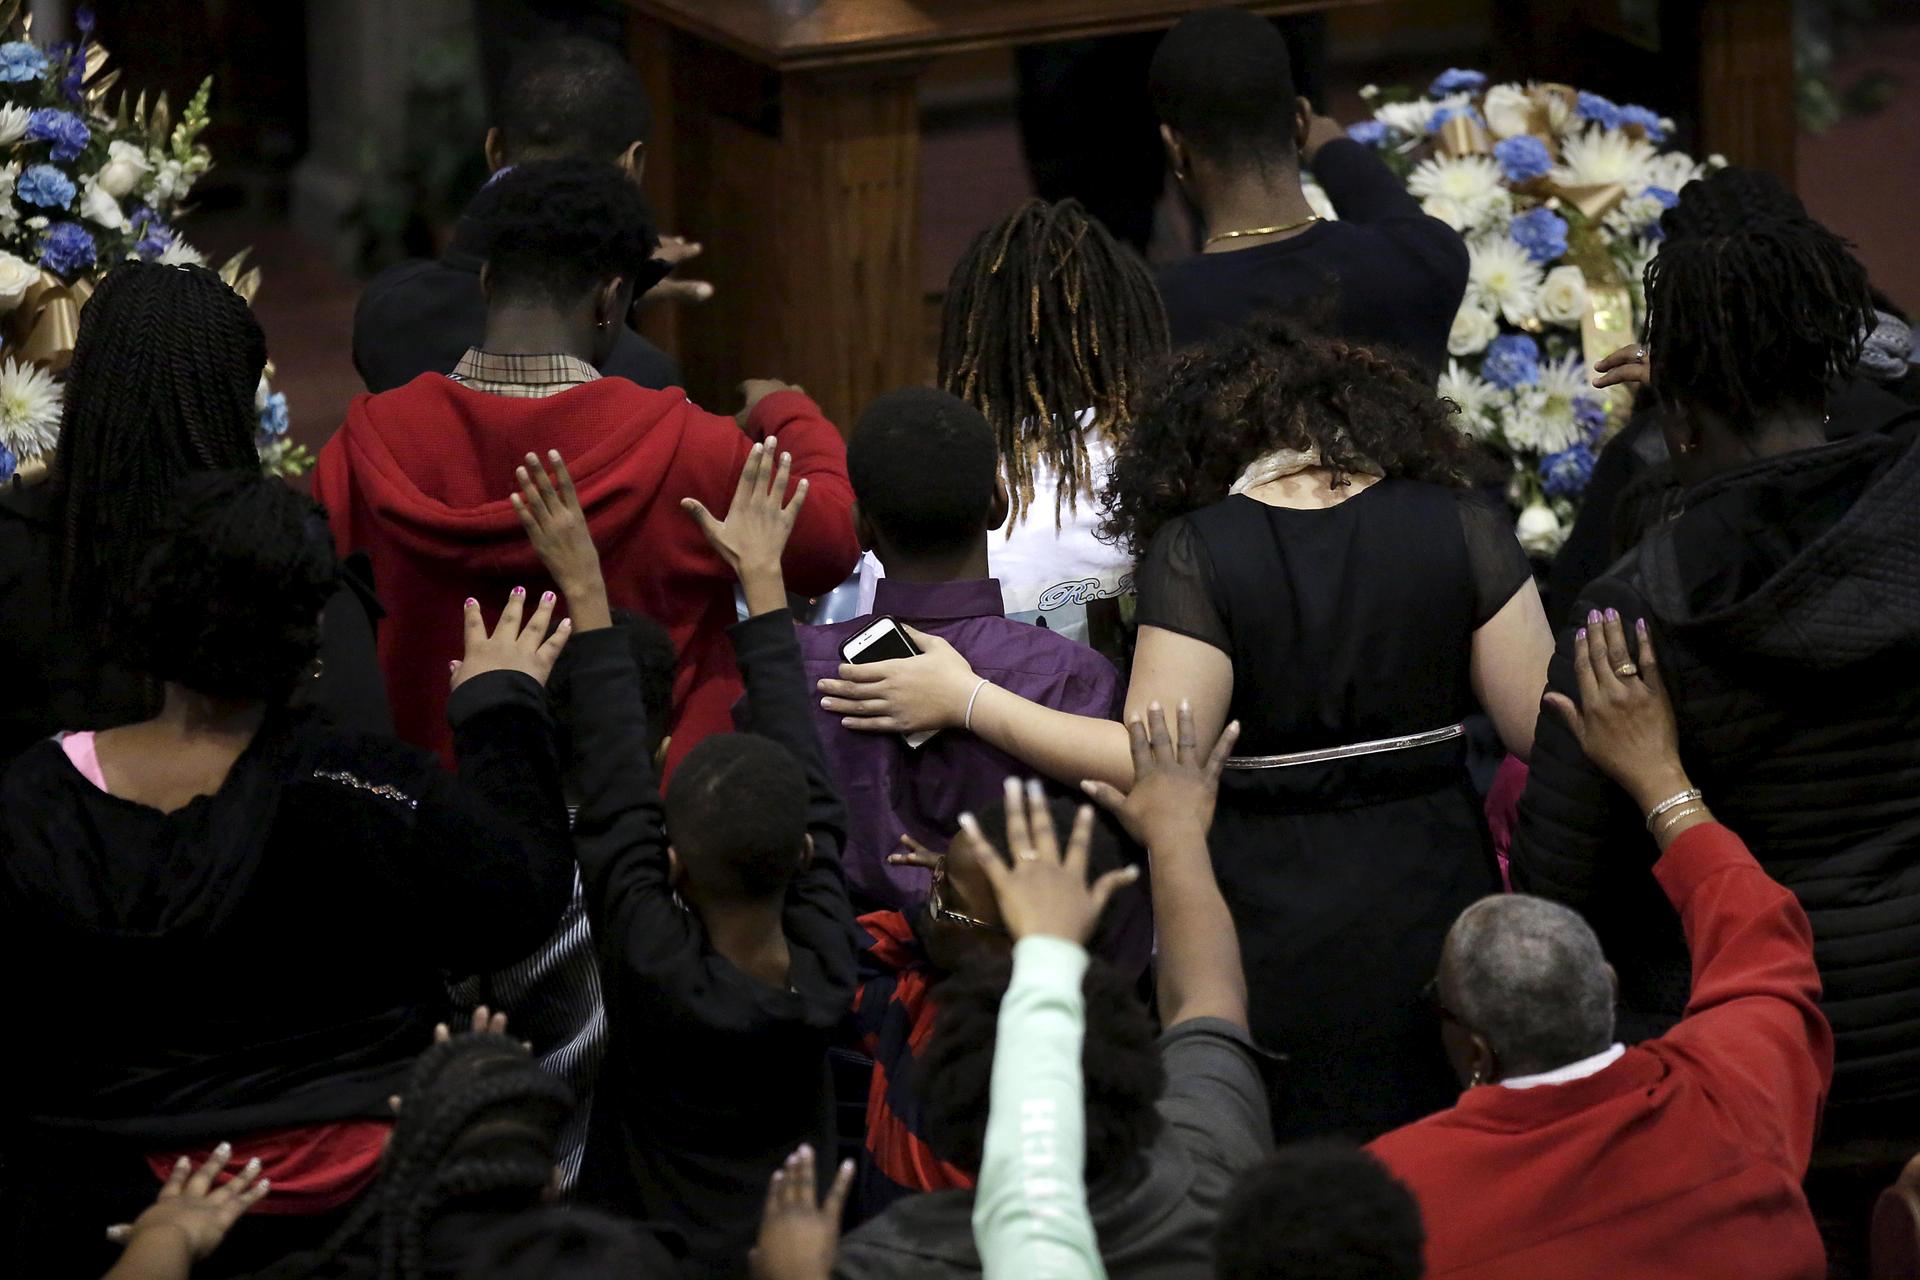 A funeral in Chicago